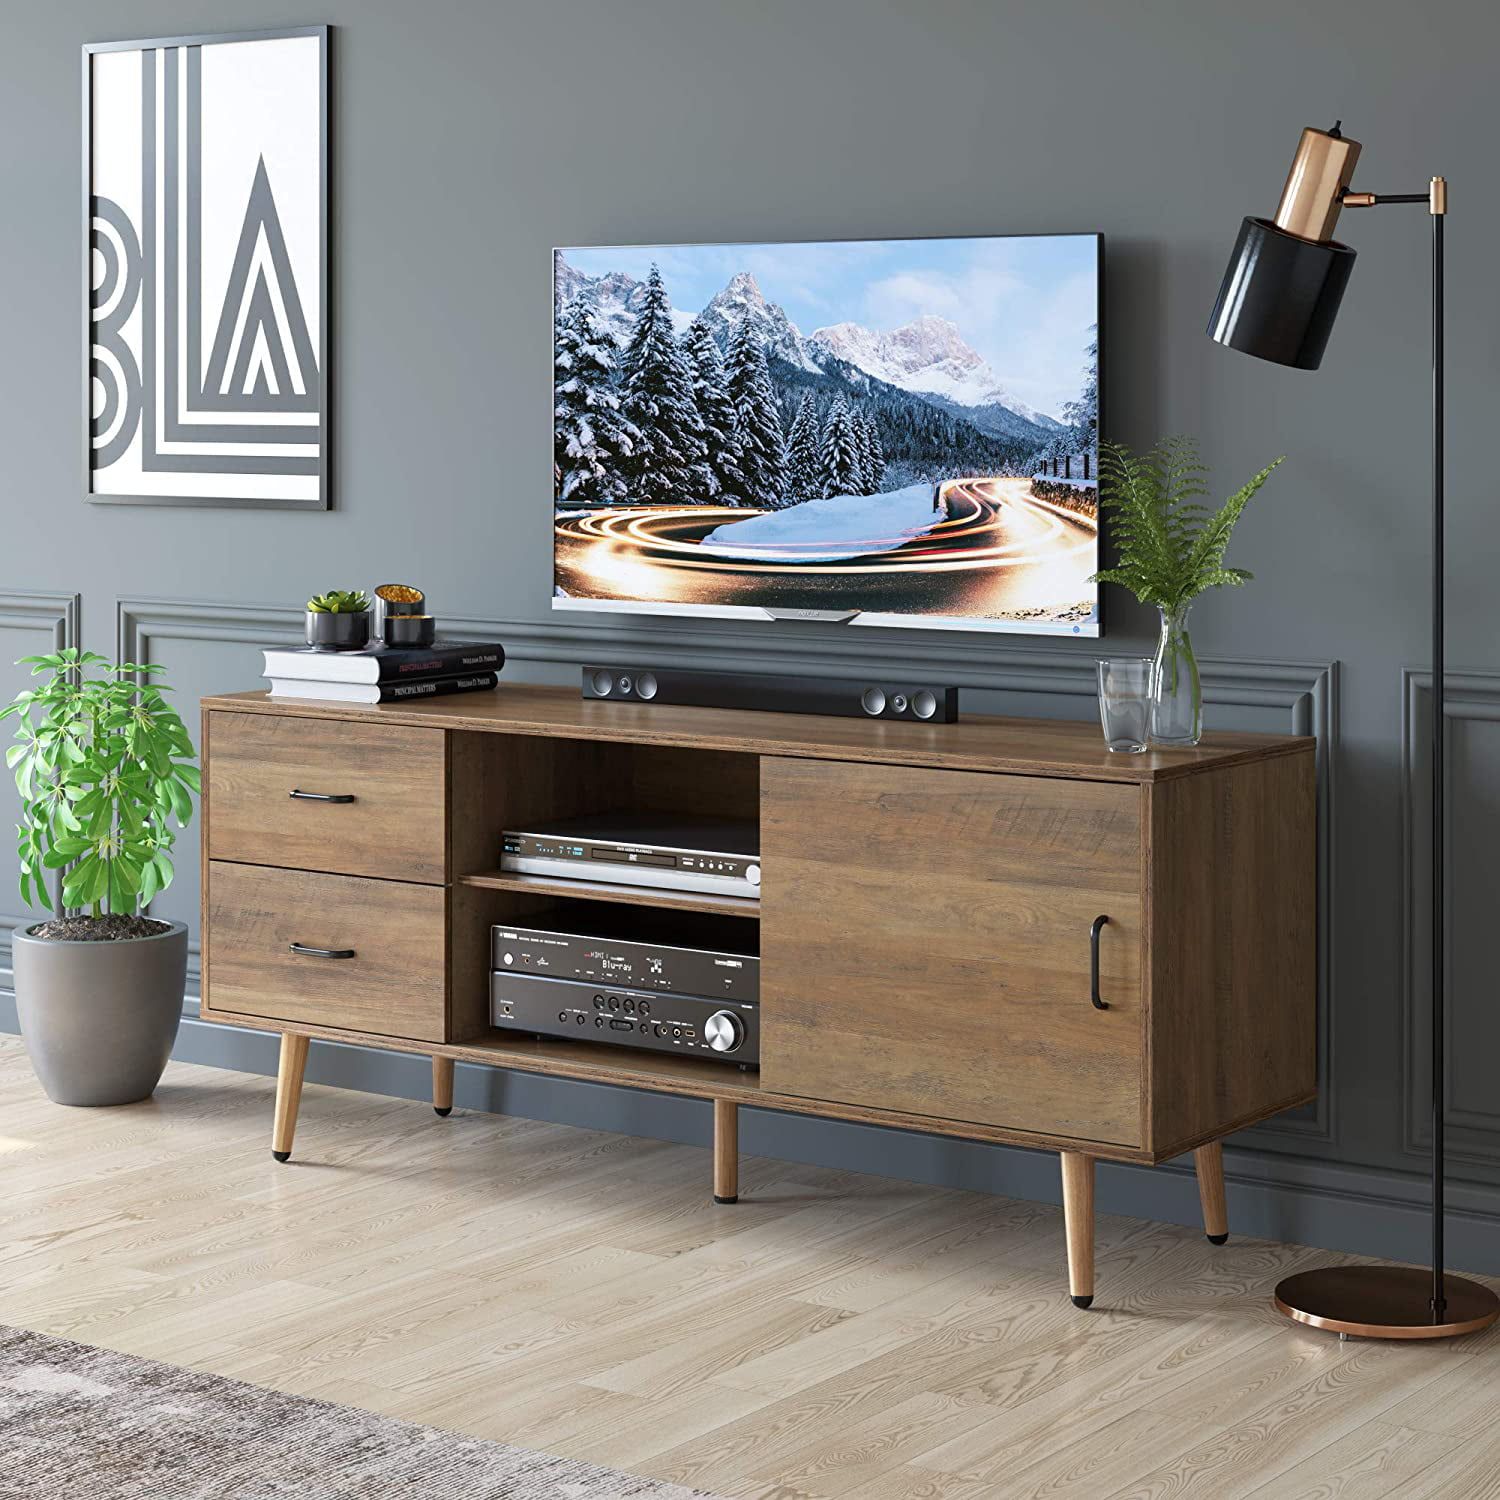 Homfa Tv Cabinet Media Console Table, Wood Tv Stand For Tvs Up To 60 With Regard To Cafe Tv Stands With Storage (Gallery 6 of 20)